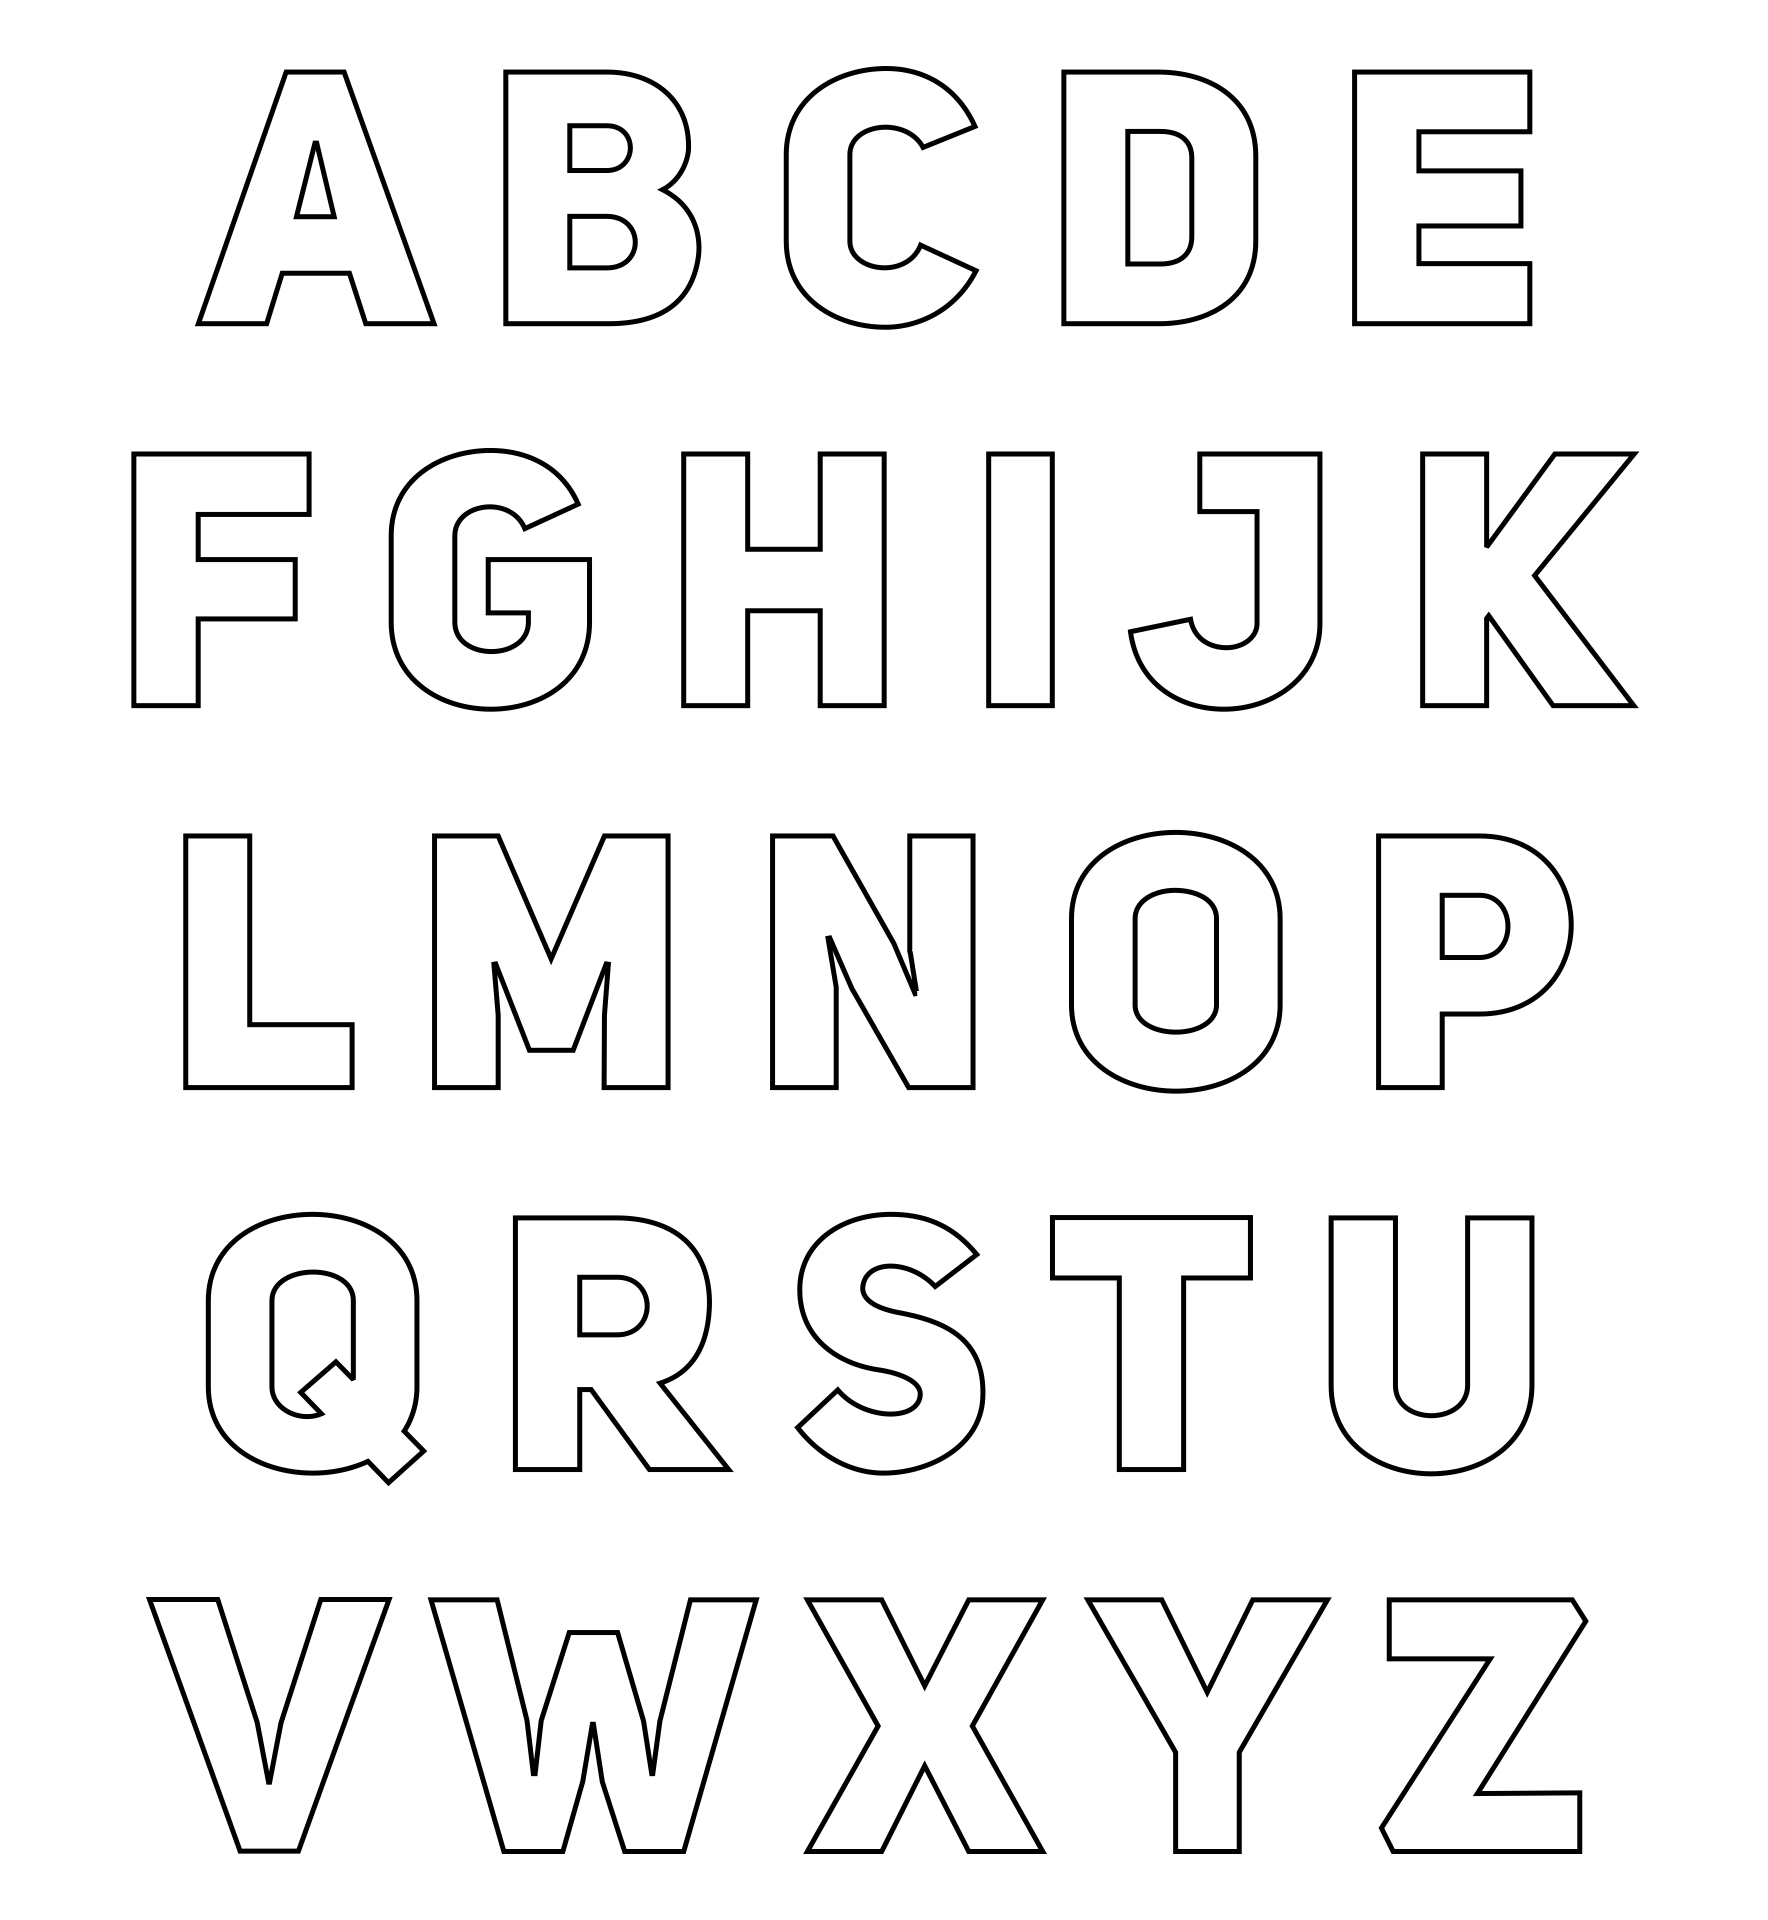 cut-out-letters-printable-free-printable-templates